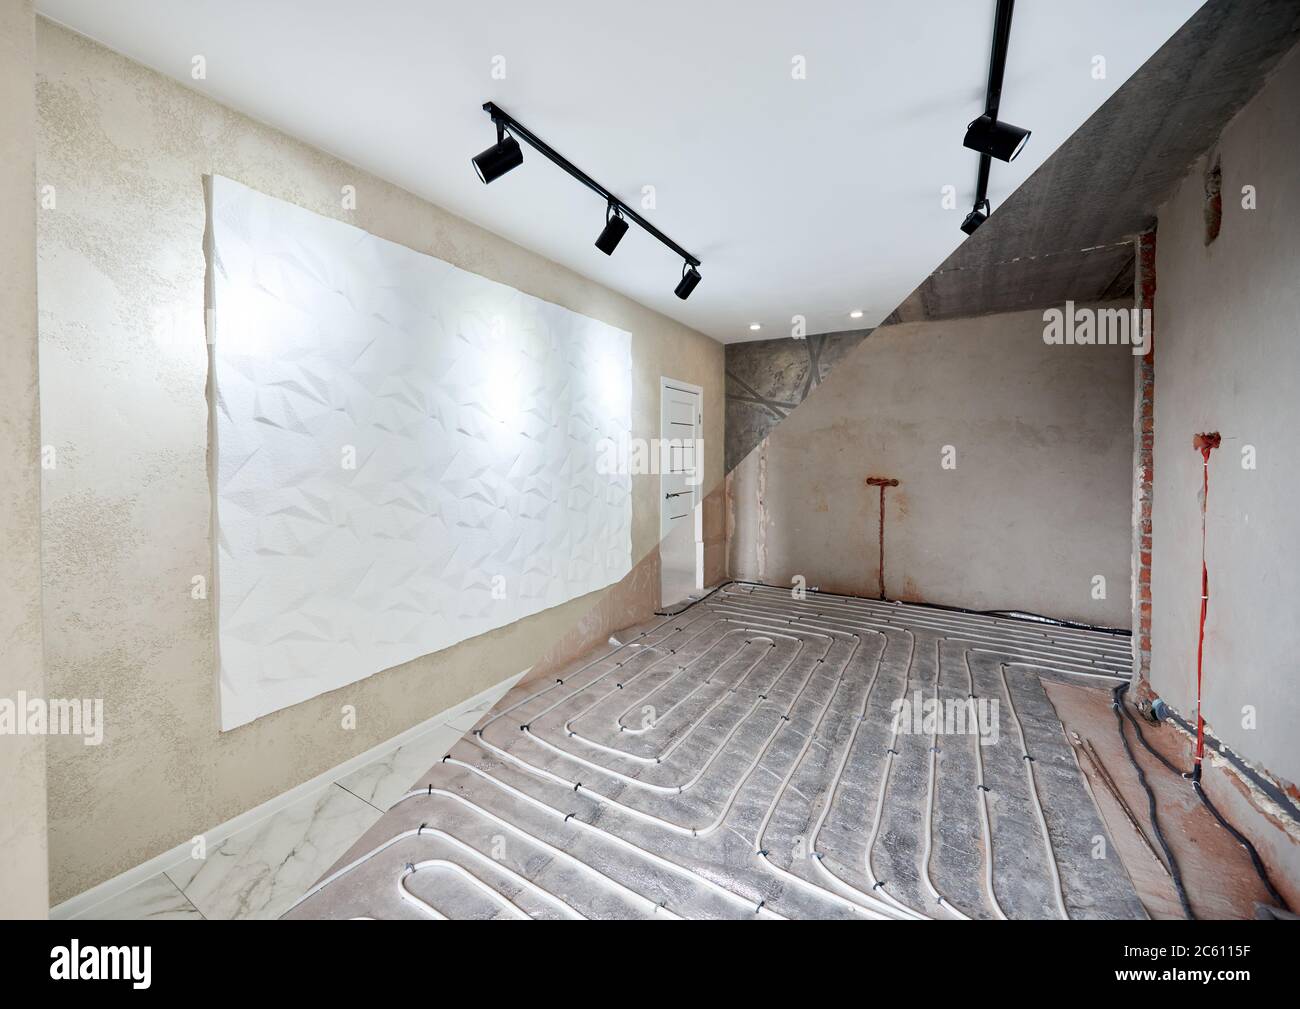 Comparison of freshly renovated apartment with stretch ceiling and old place with underfloor heating pipes. Empty flat with stylish design before and after refurbishment. Concept of home renovation. Stock Photo